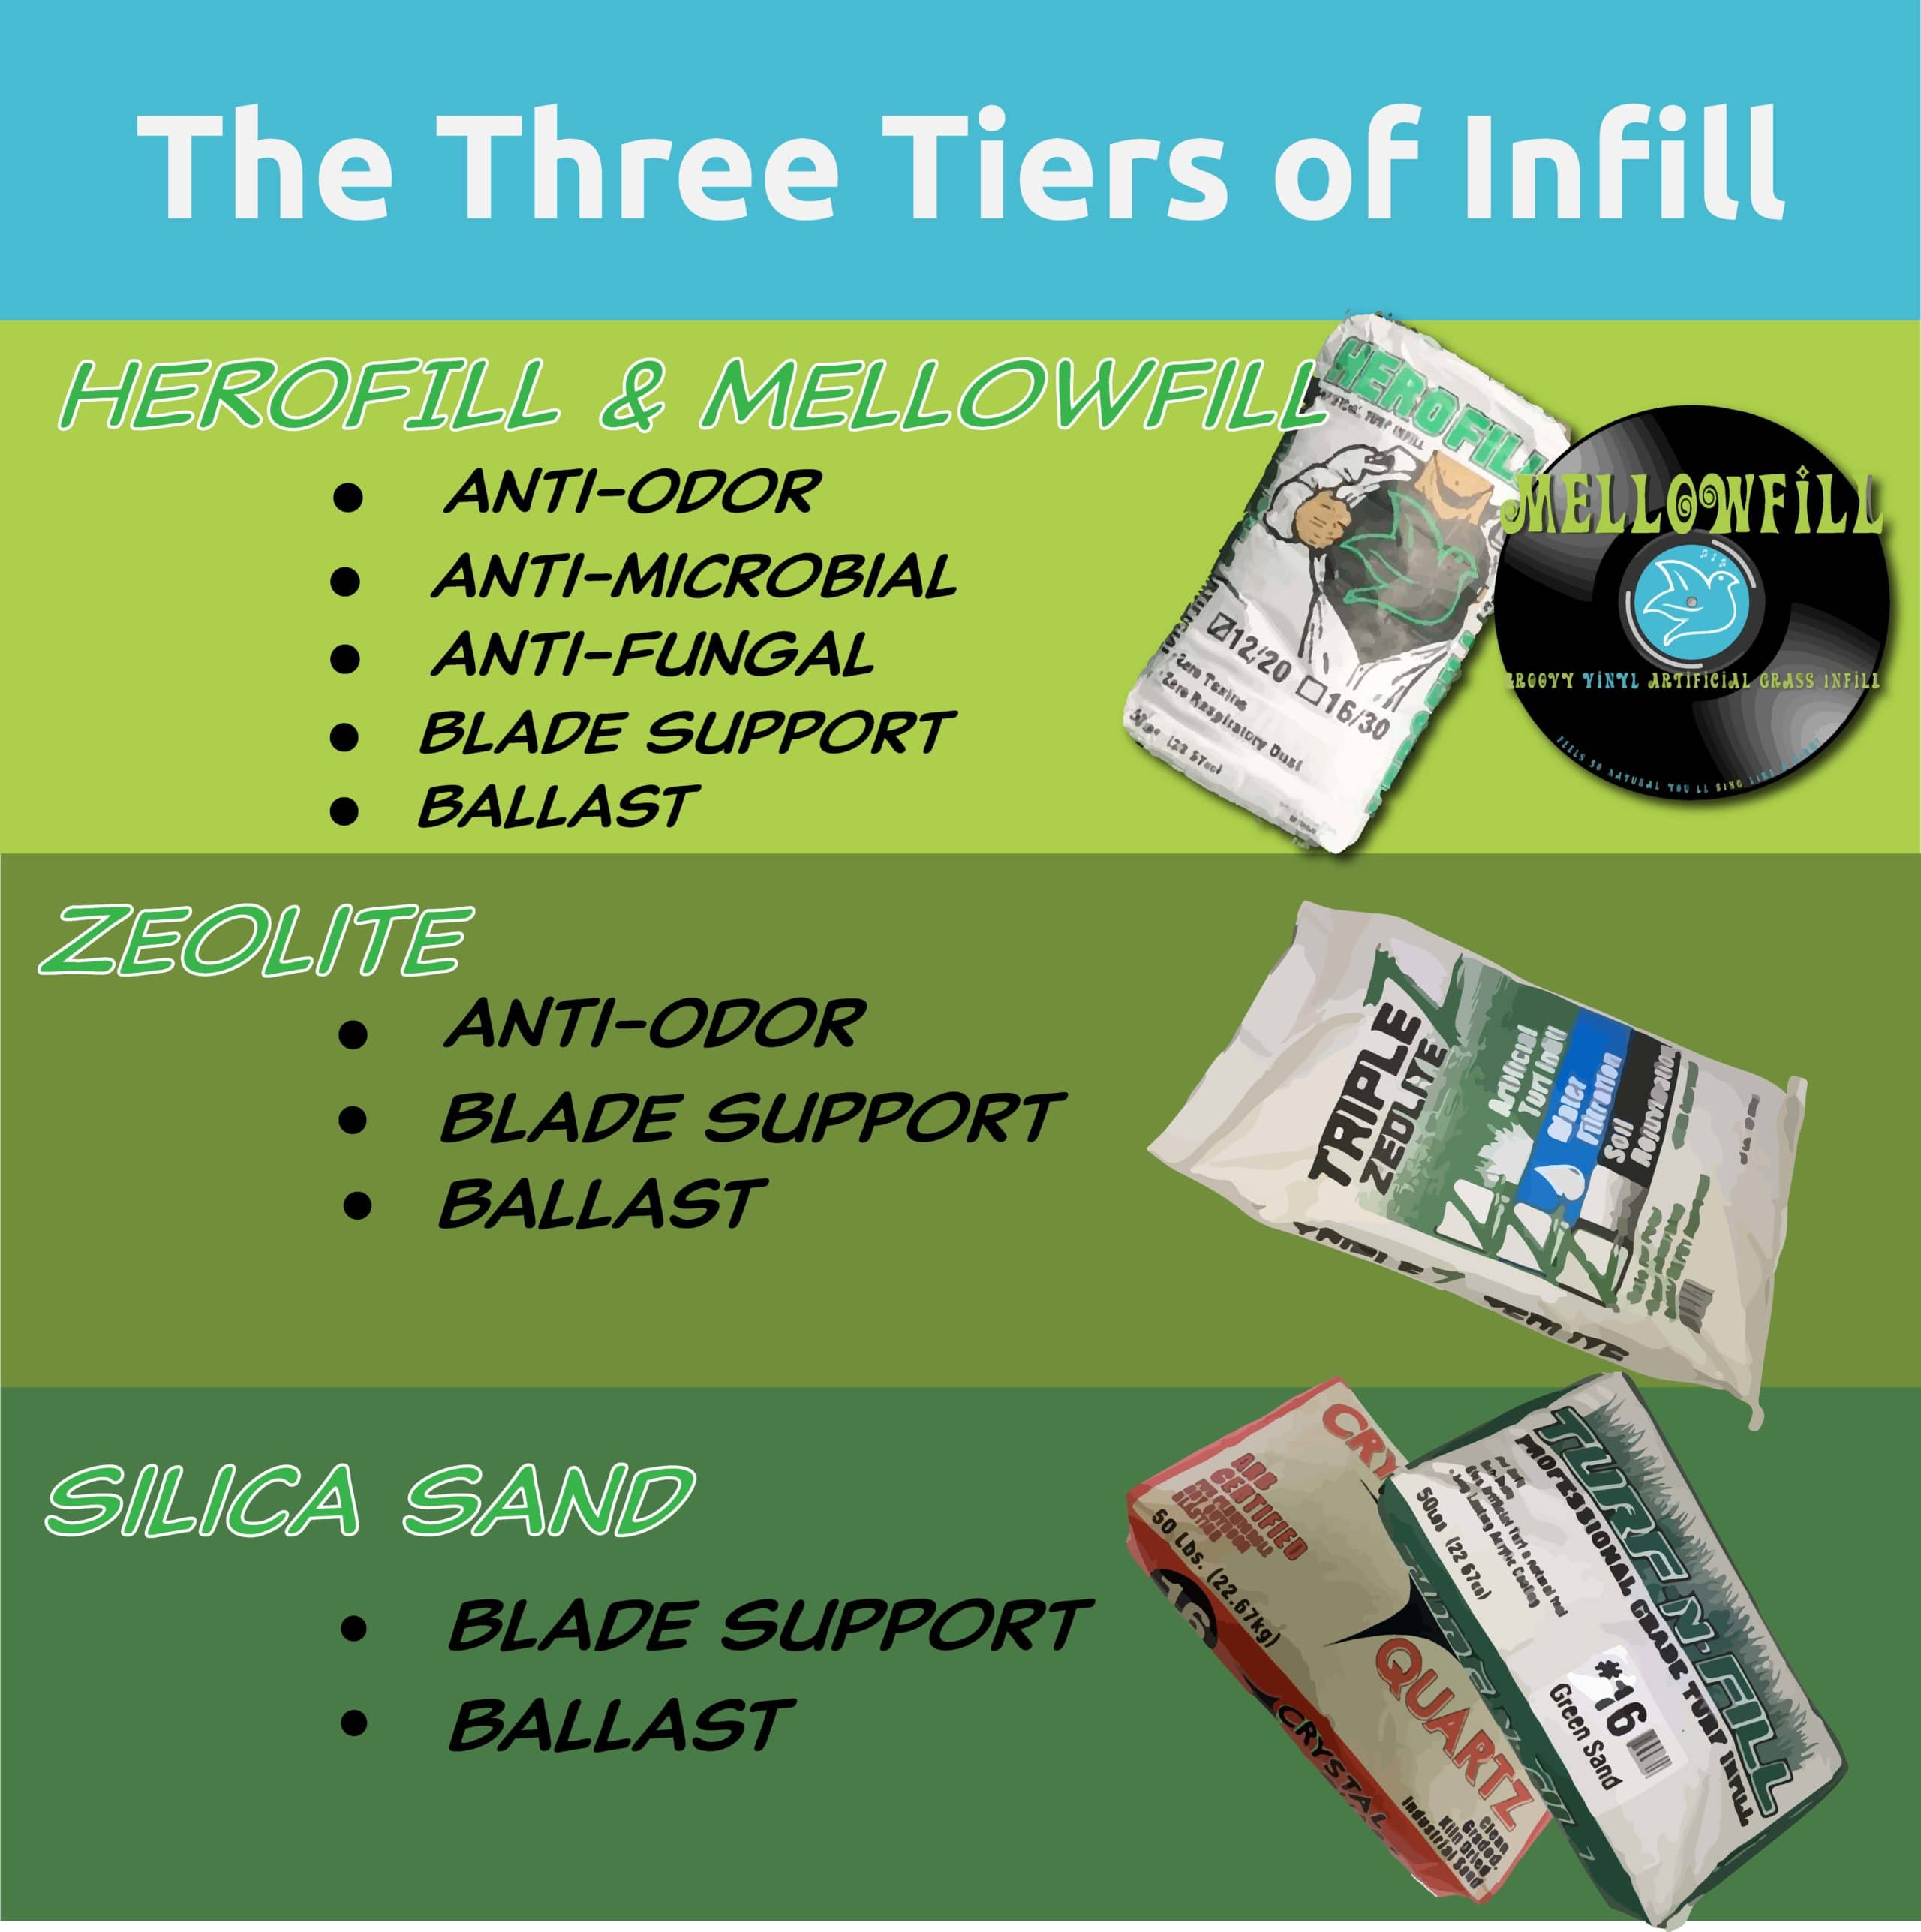 Tiers of Infill